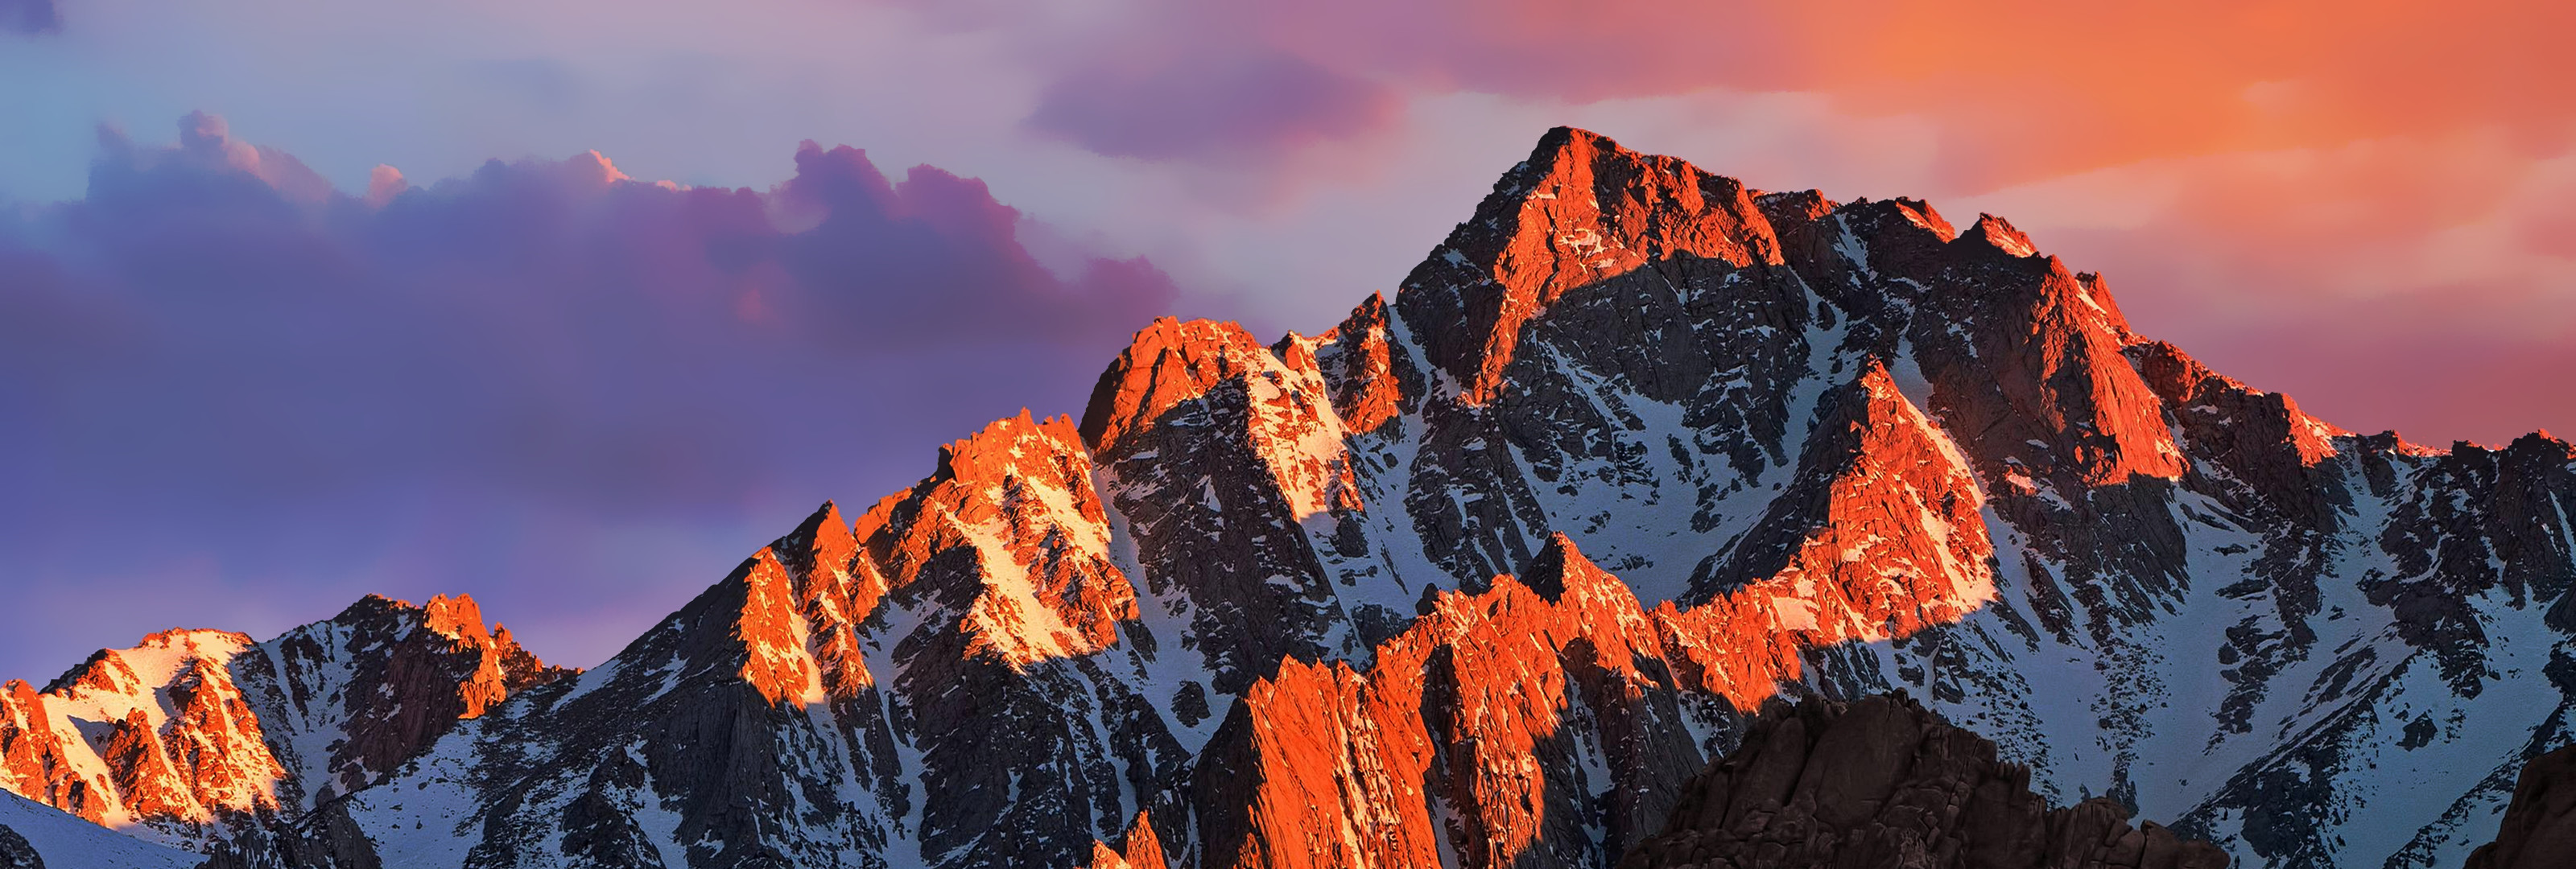 Macos Extended Wallpaper For Ultrawide Monitors Mac